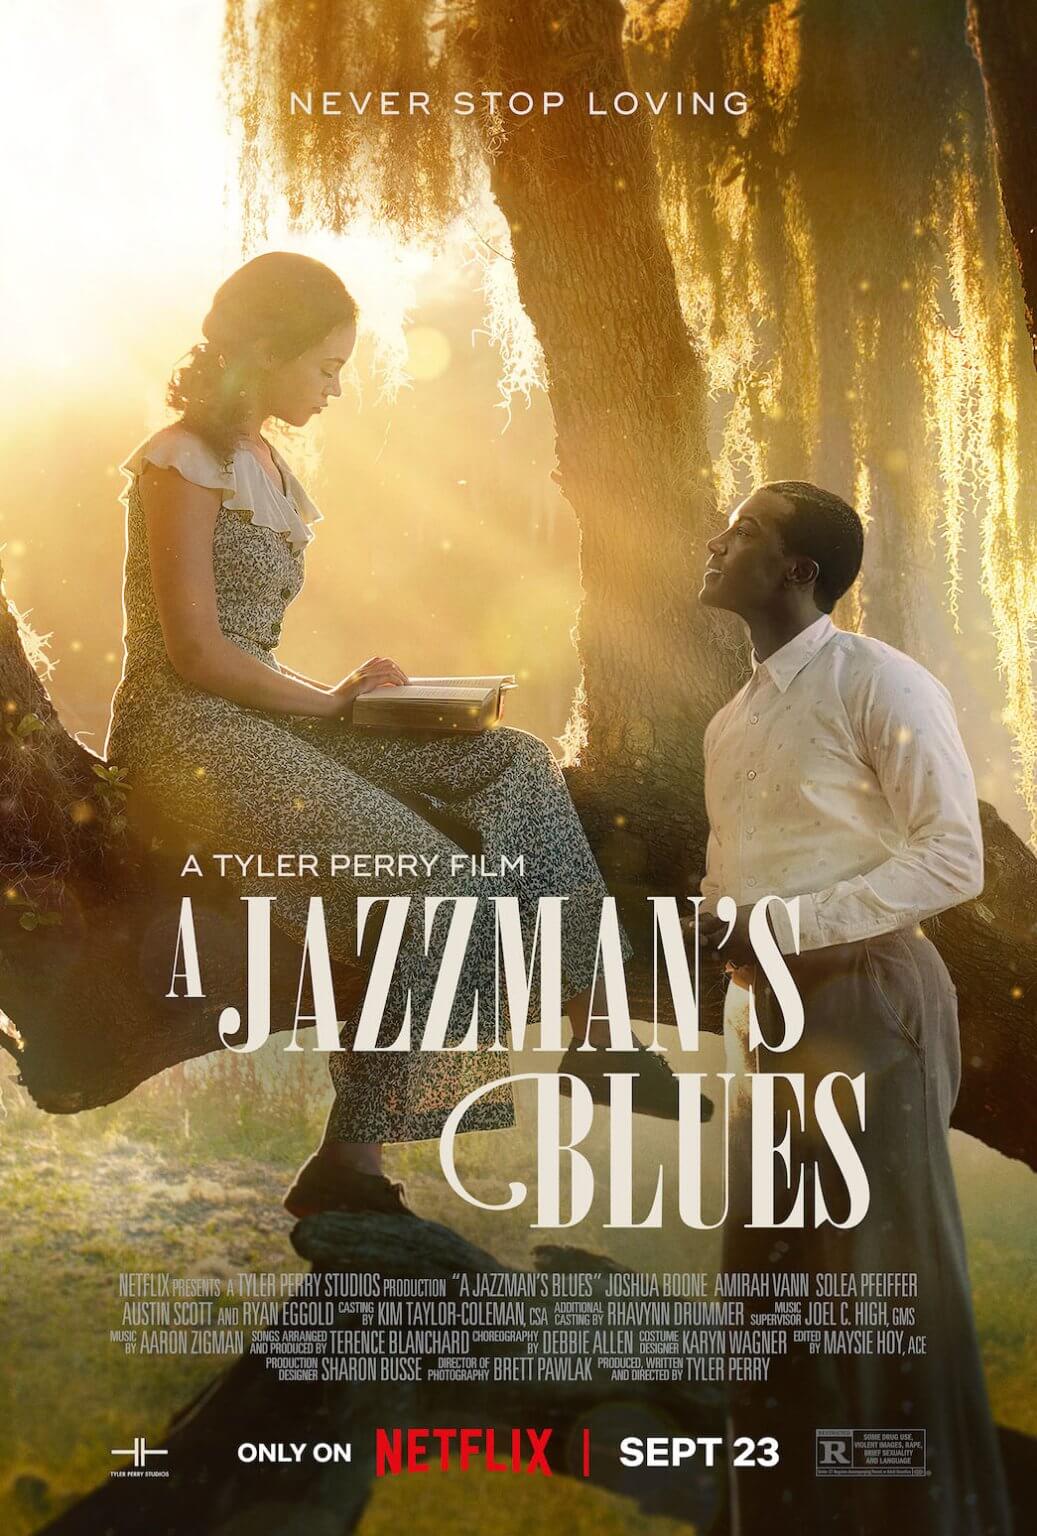 Should You Watch ‘A Jazzman’s Blues’ on Netflix? Movie News and Reviews